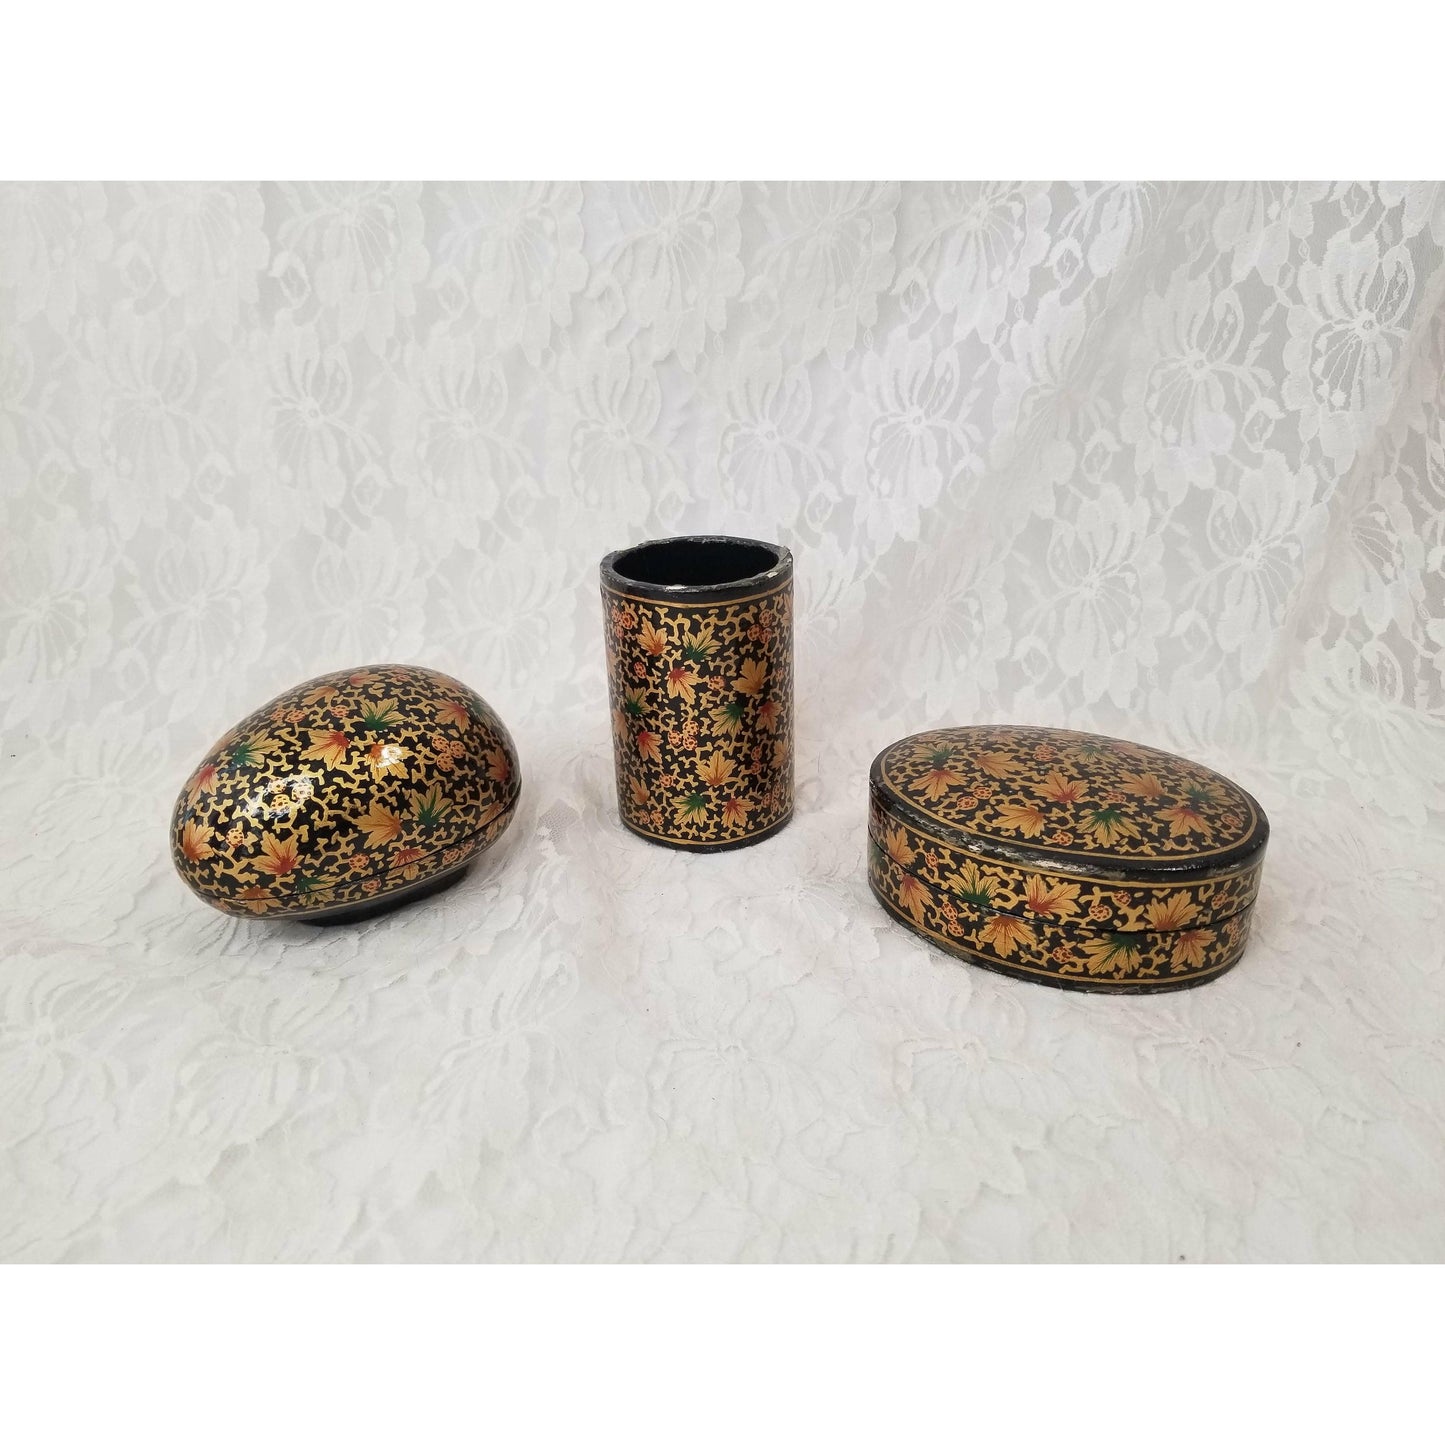 Vintage Hand Painted Persian Kashmir Paper Mache Lacquer Cup and Trinket Box Desk Set ~ Intricate Hand Painted Design ~ RARE Great Condition